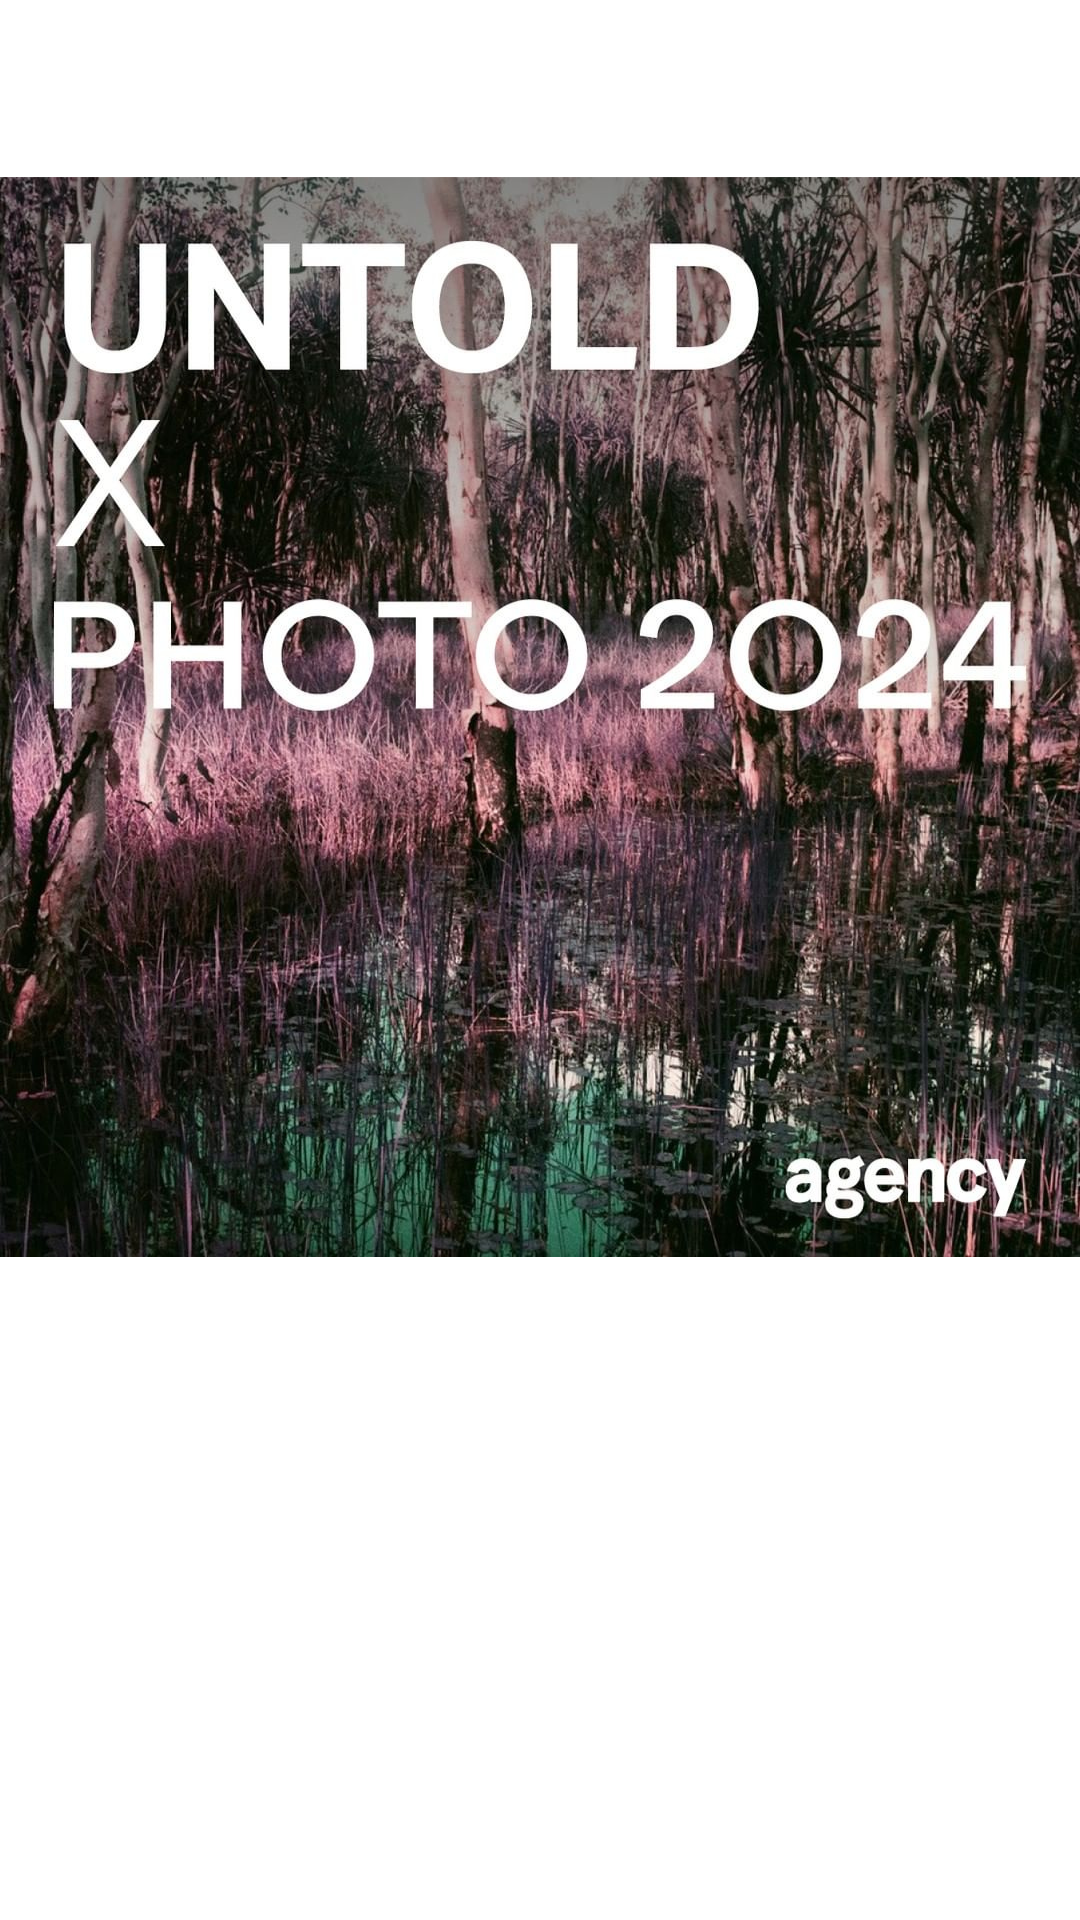 UNTOLD X PHOTO2024 in white text over 'Strange Things' a work by Corben Mudjandi from his 